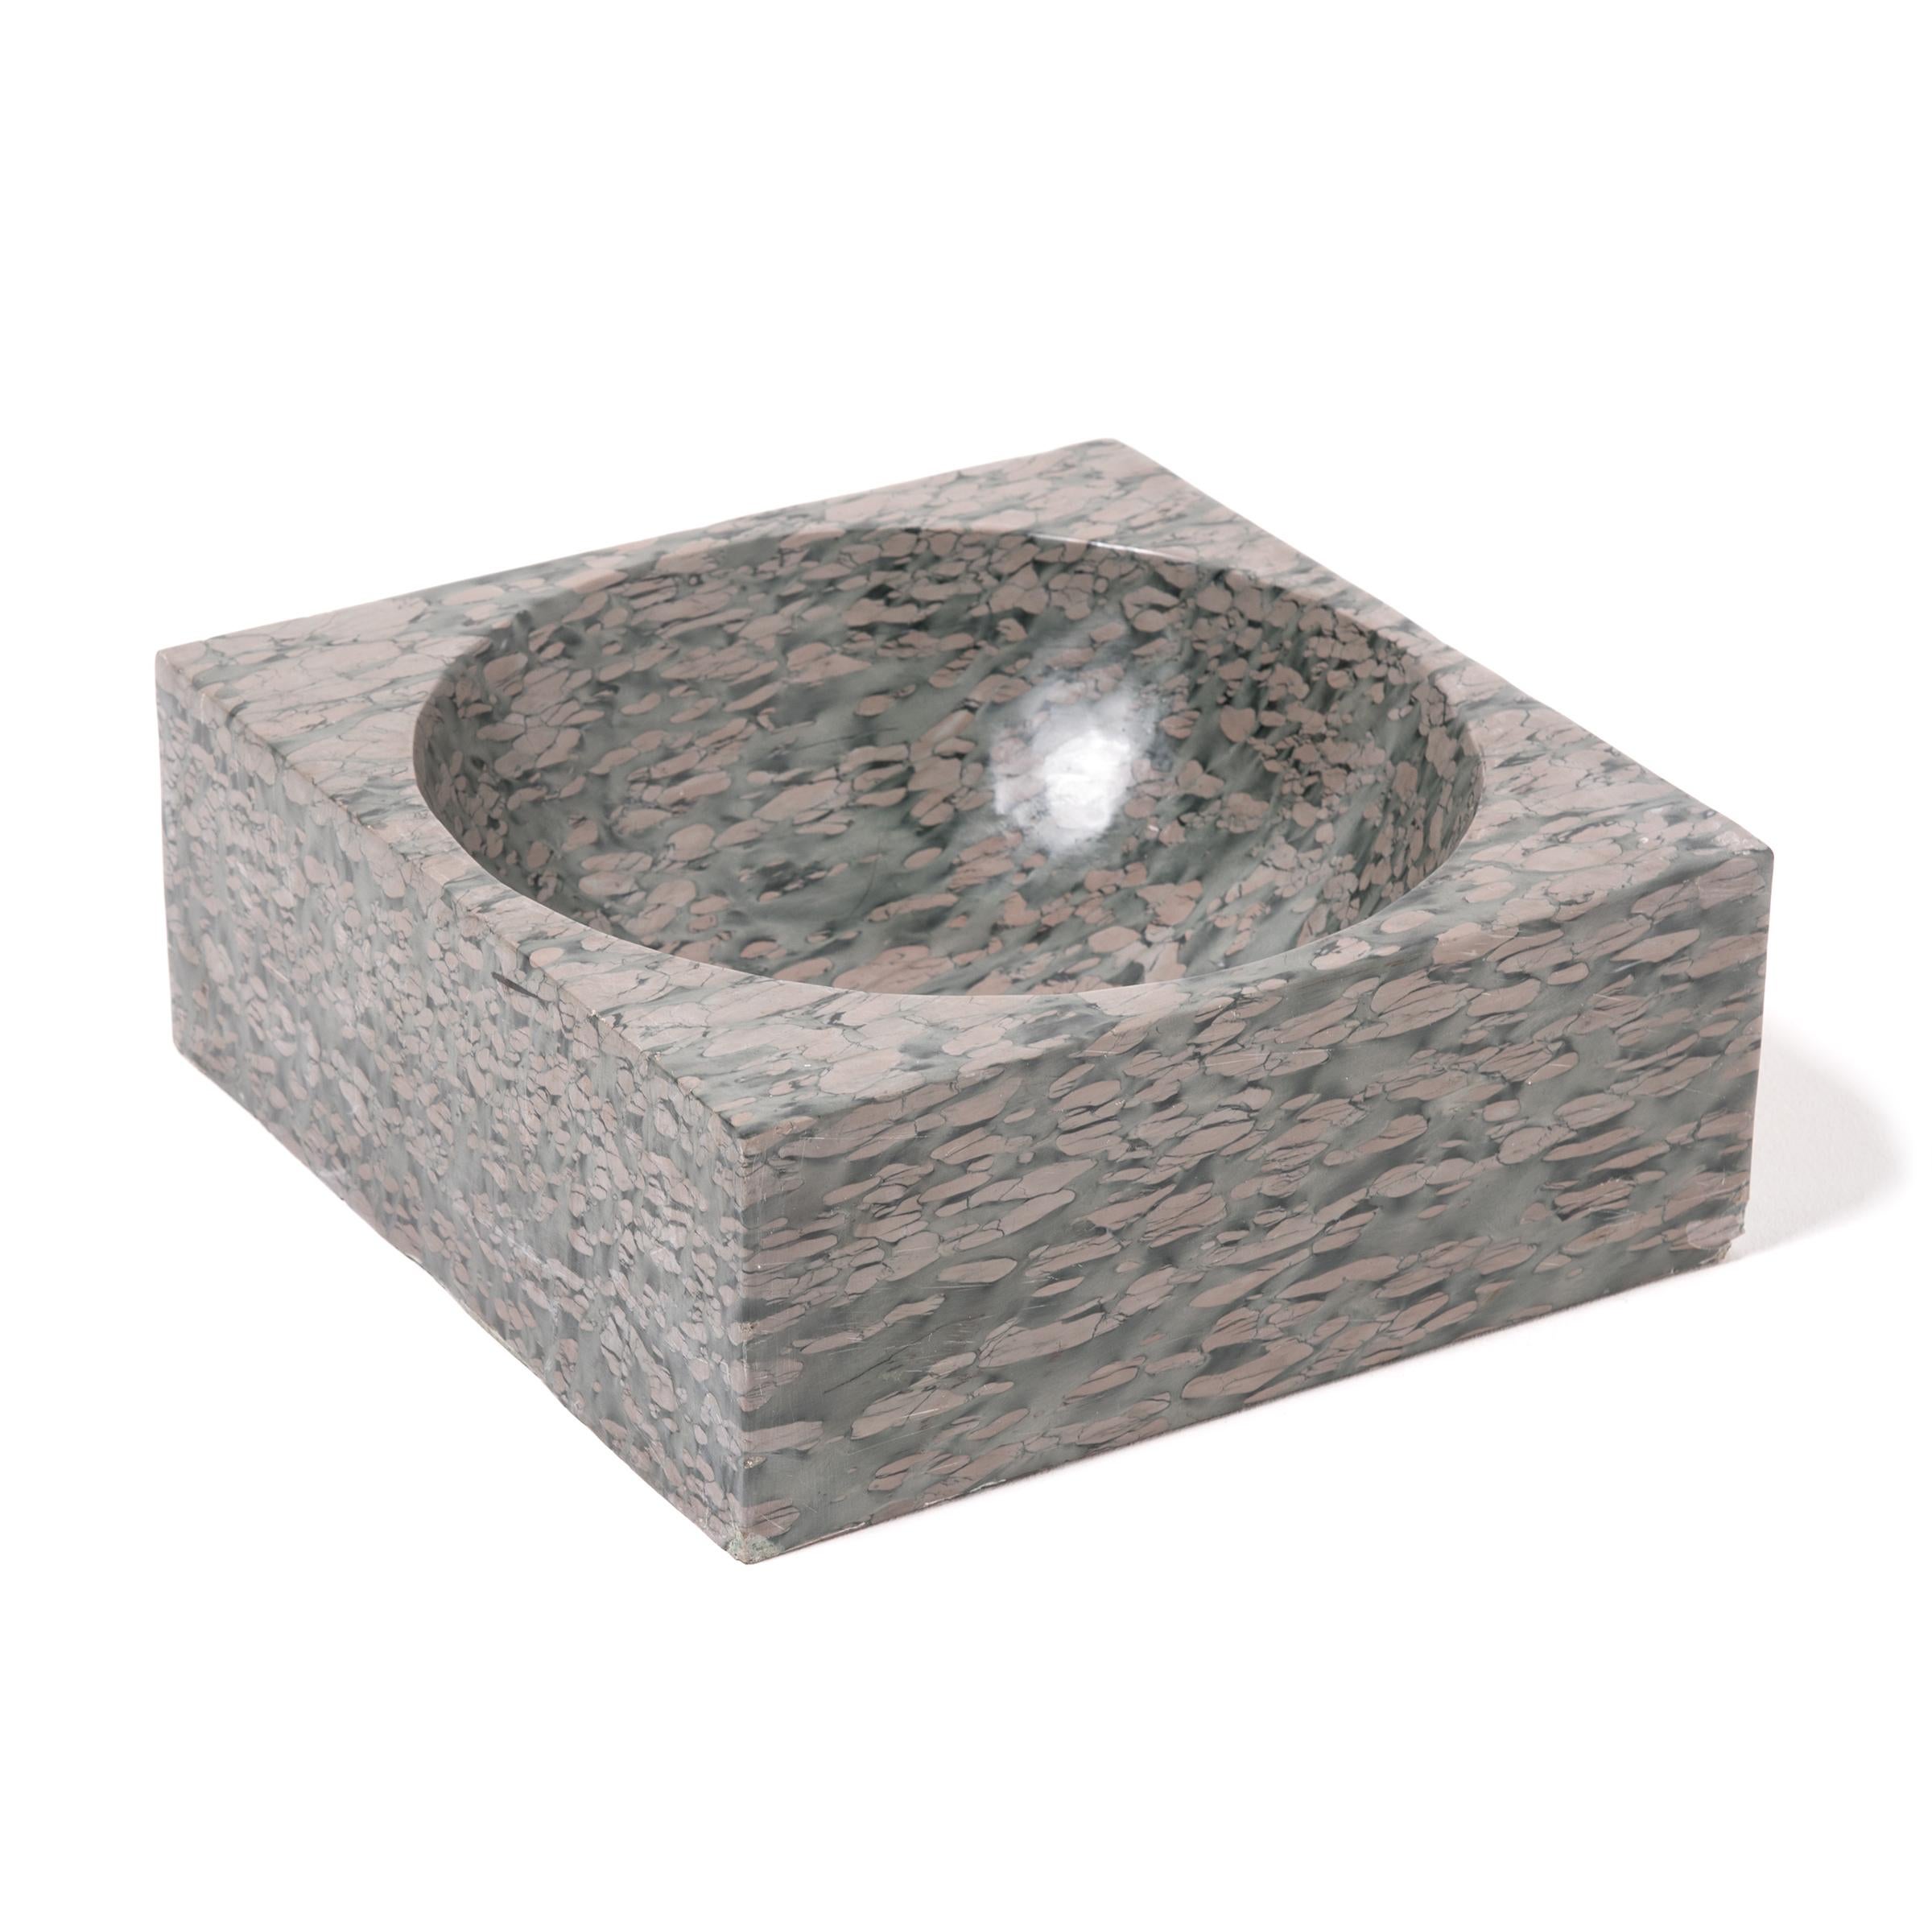 A clean-lined interpretation of an ancient form, this stone basin was hand carved with a rounded interior within finely edged square form. The basin looks meticulously painted, but the mesmerizing pattern of zhenzhu is inherent to the stone, a